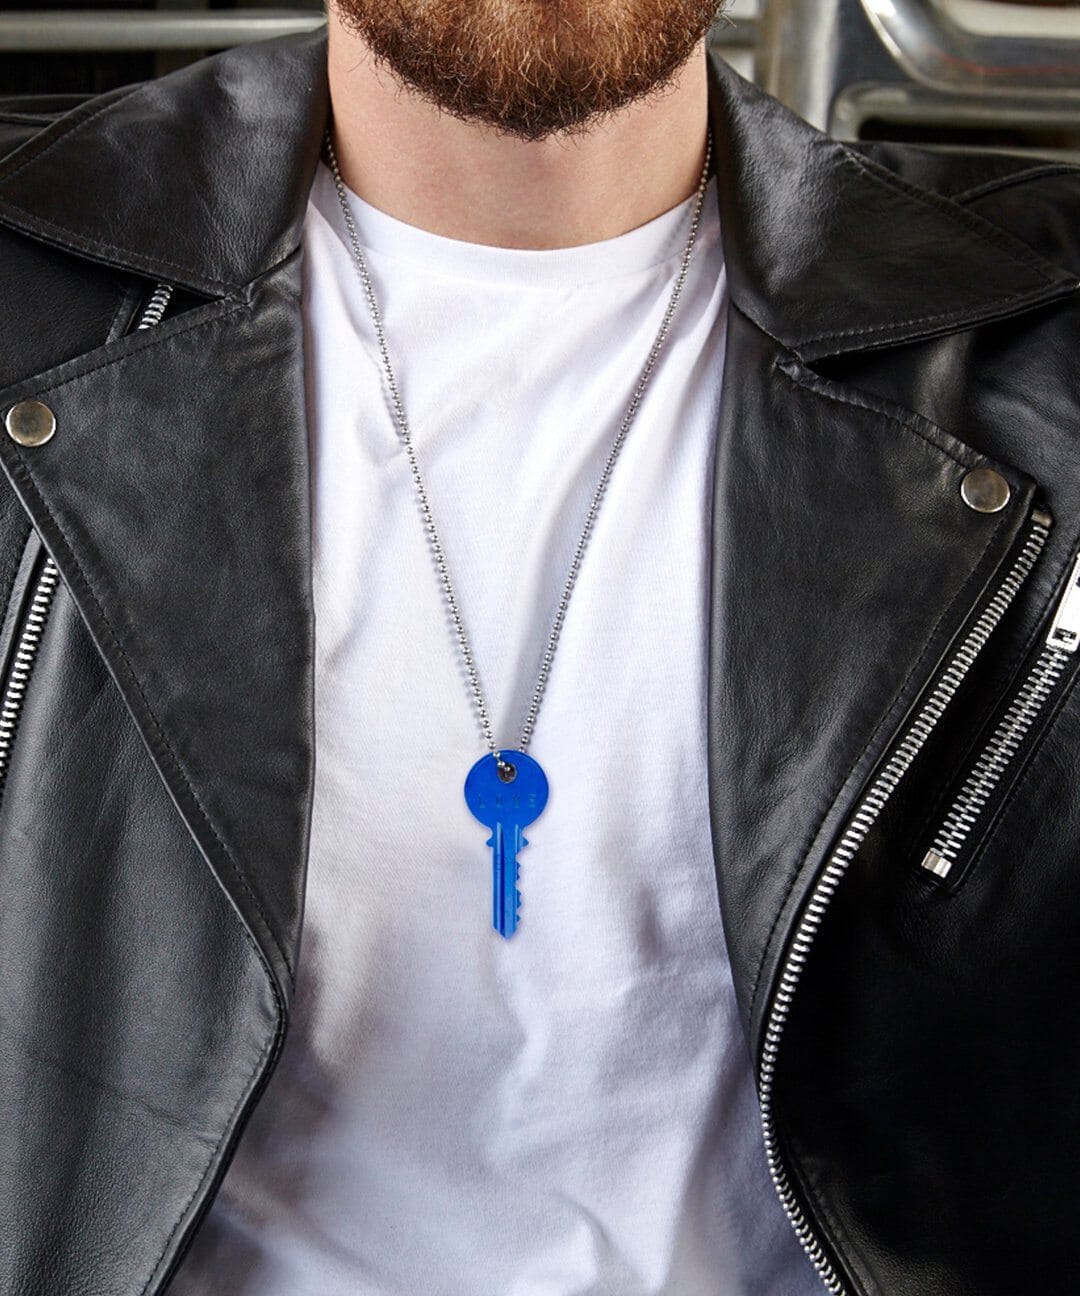 Stainless Steel Gothic Key - Mens Pendant Necklace Chain - Walmart.com